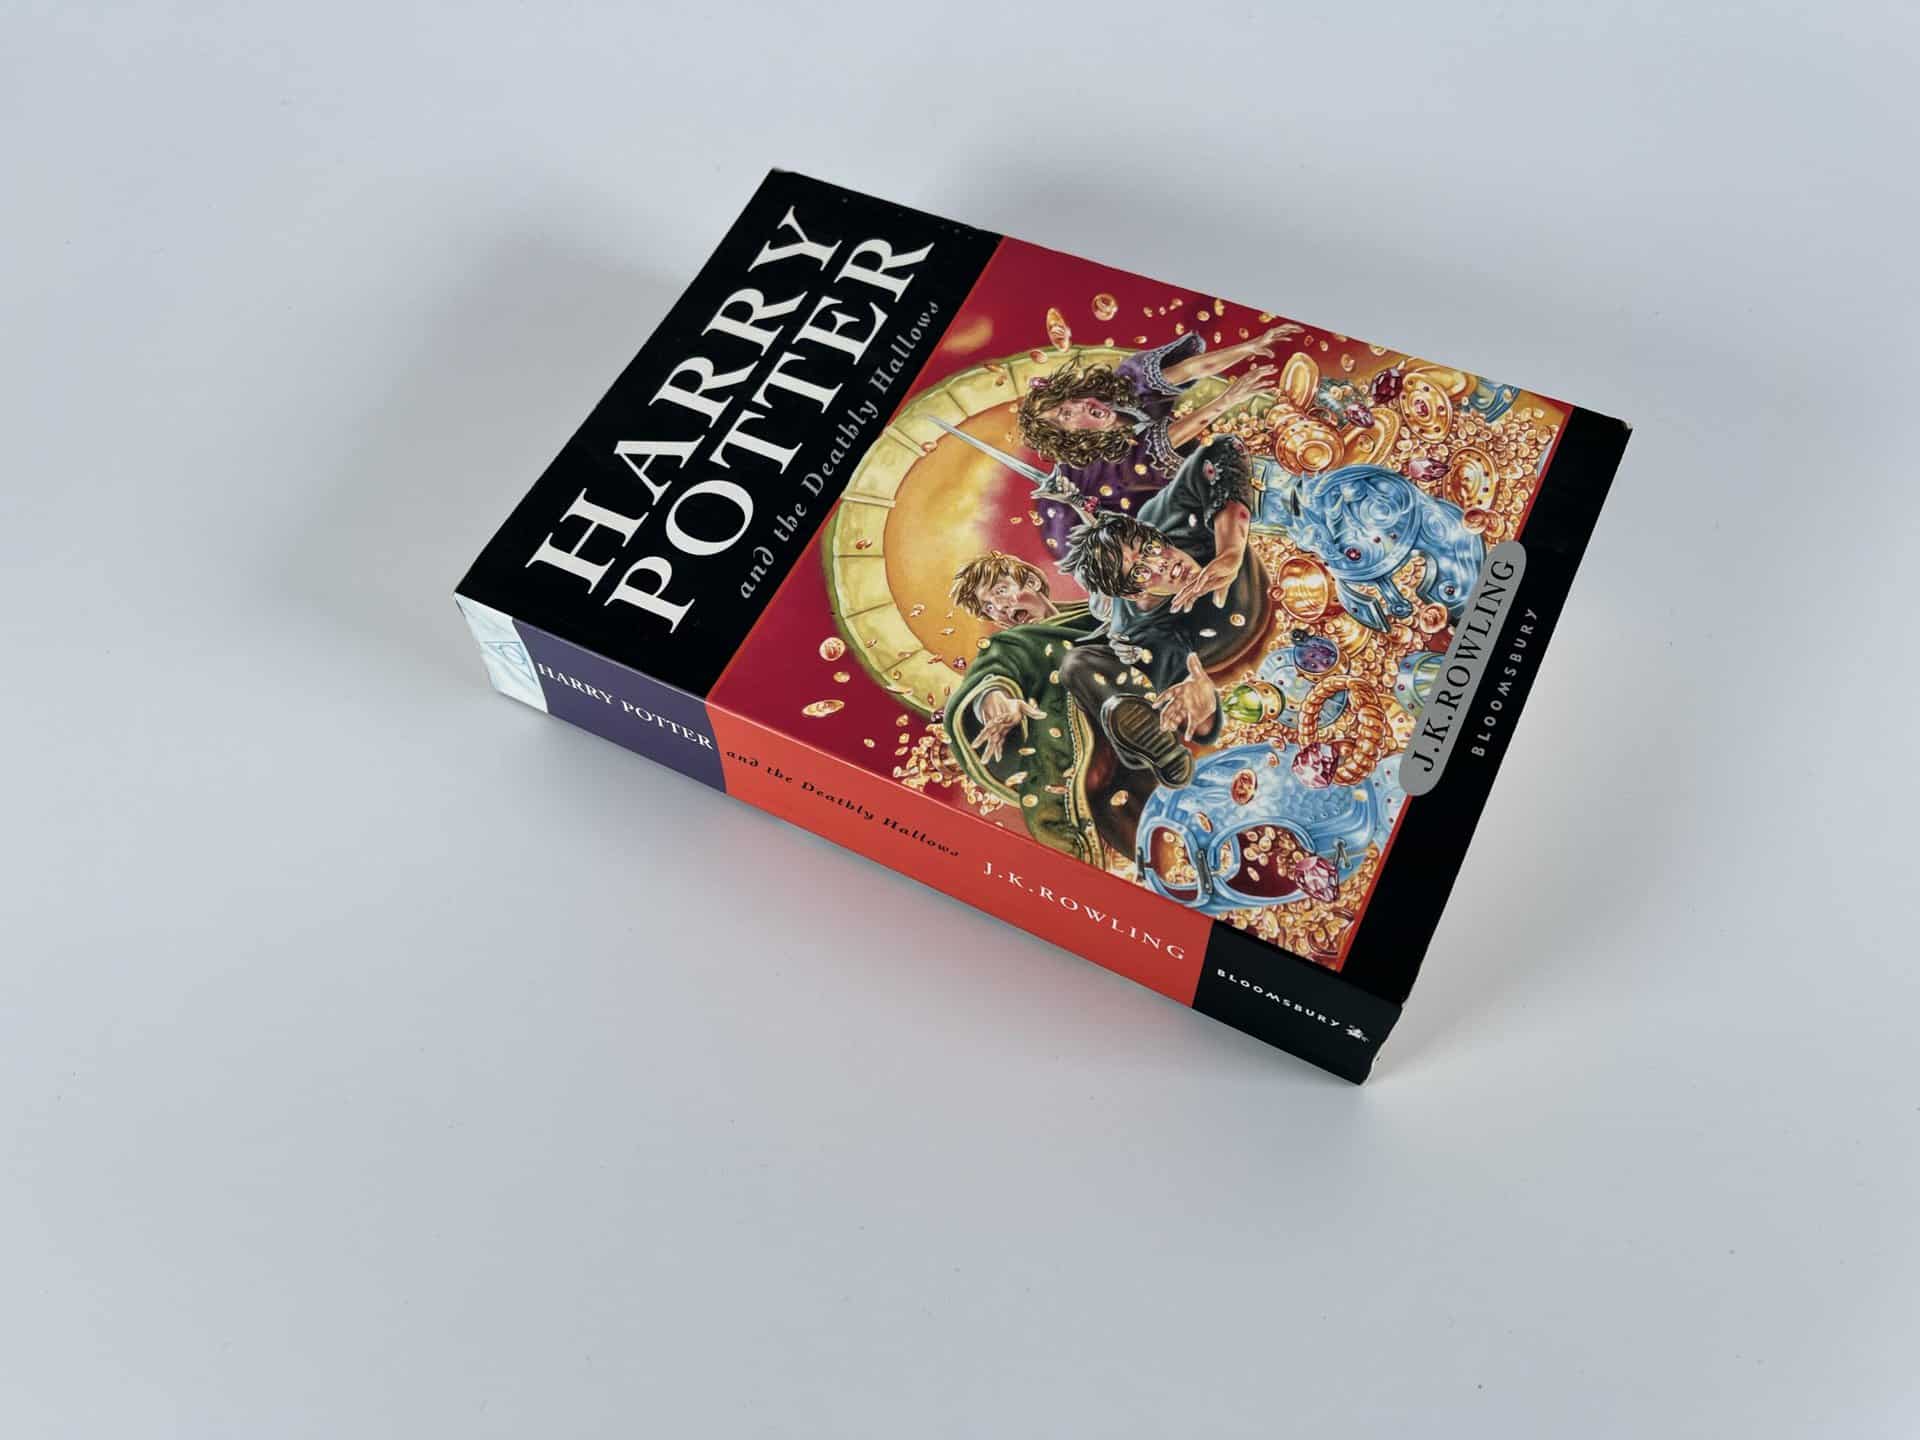 jk rowling hpatdh first paperback3